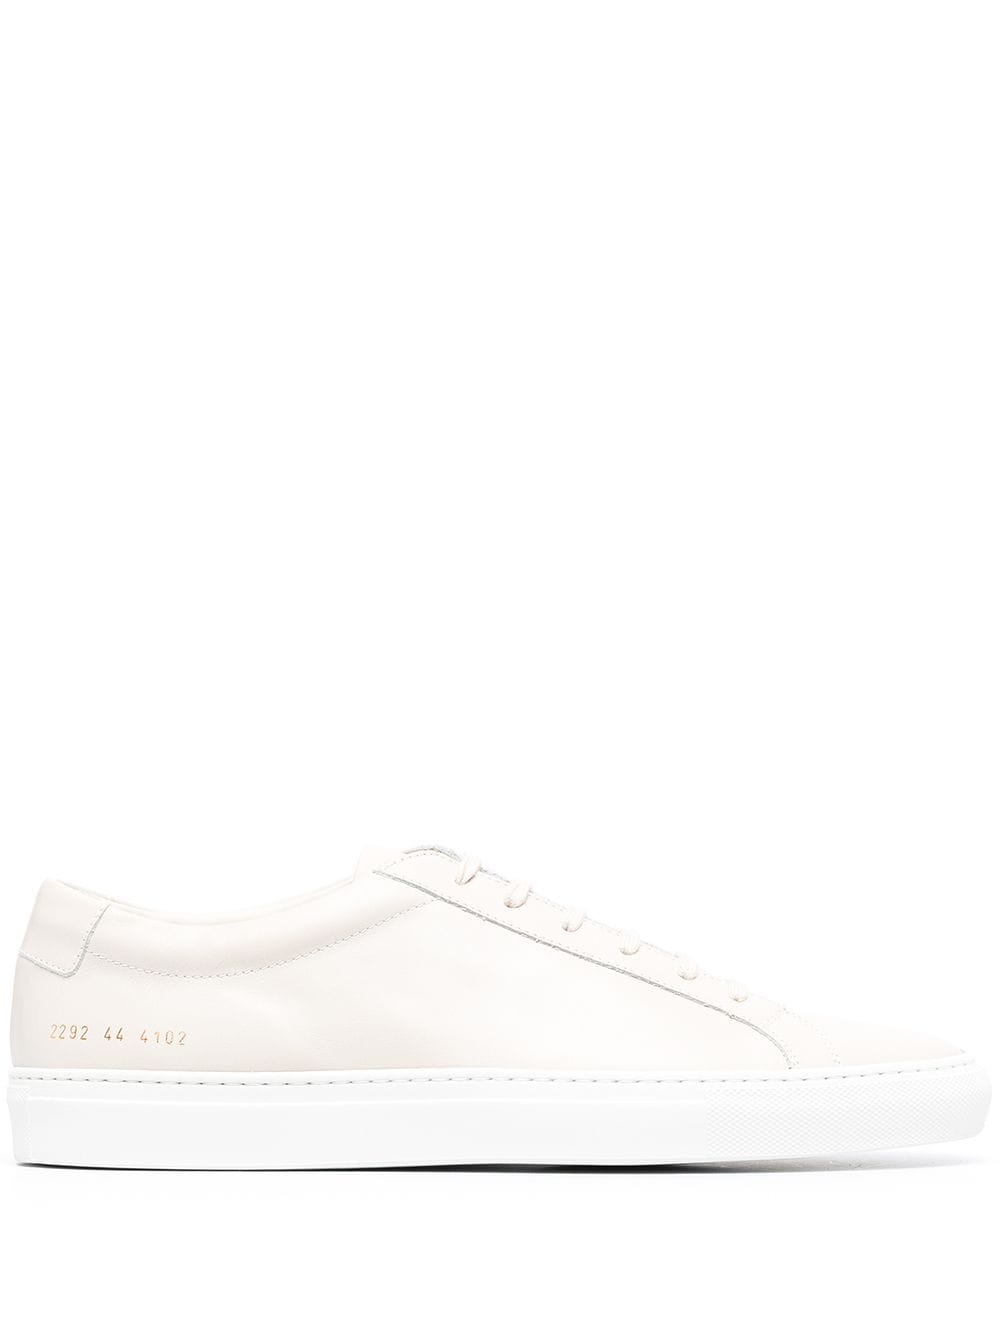 Sneaker White мъжки обувки Common Projects 839684025_44